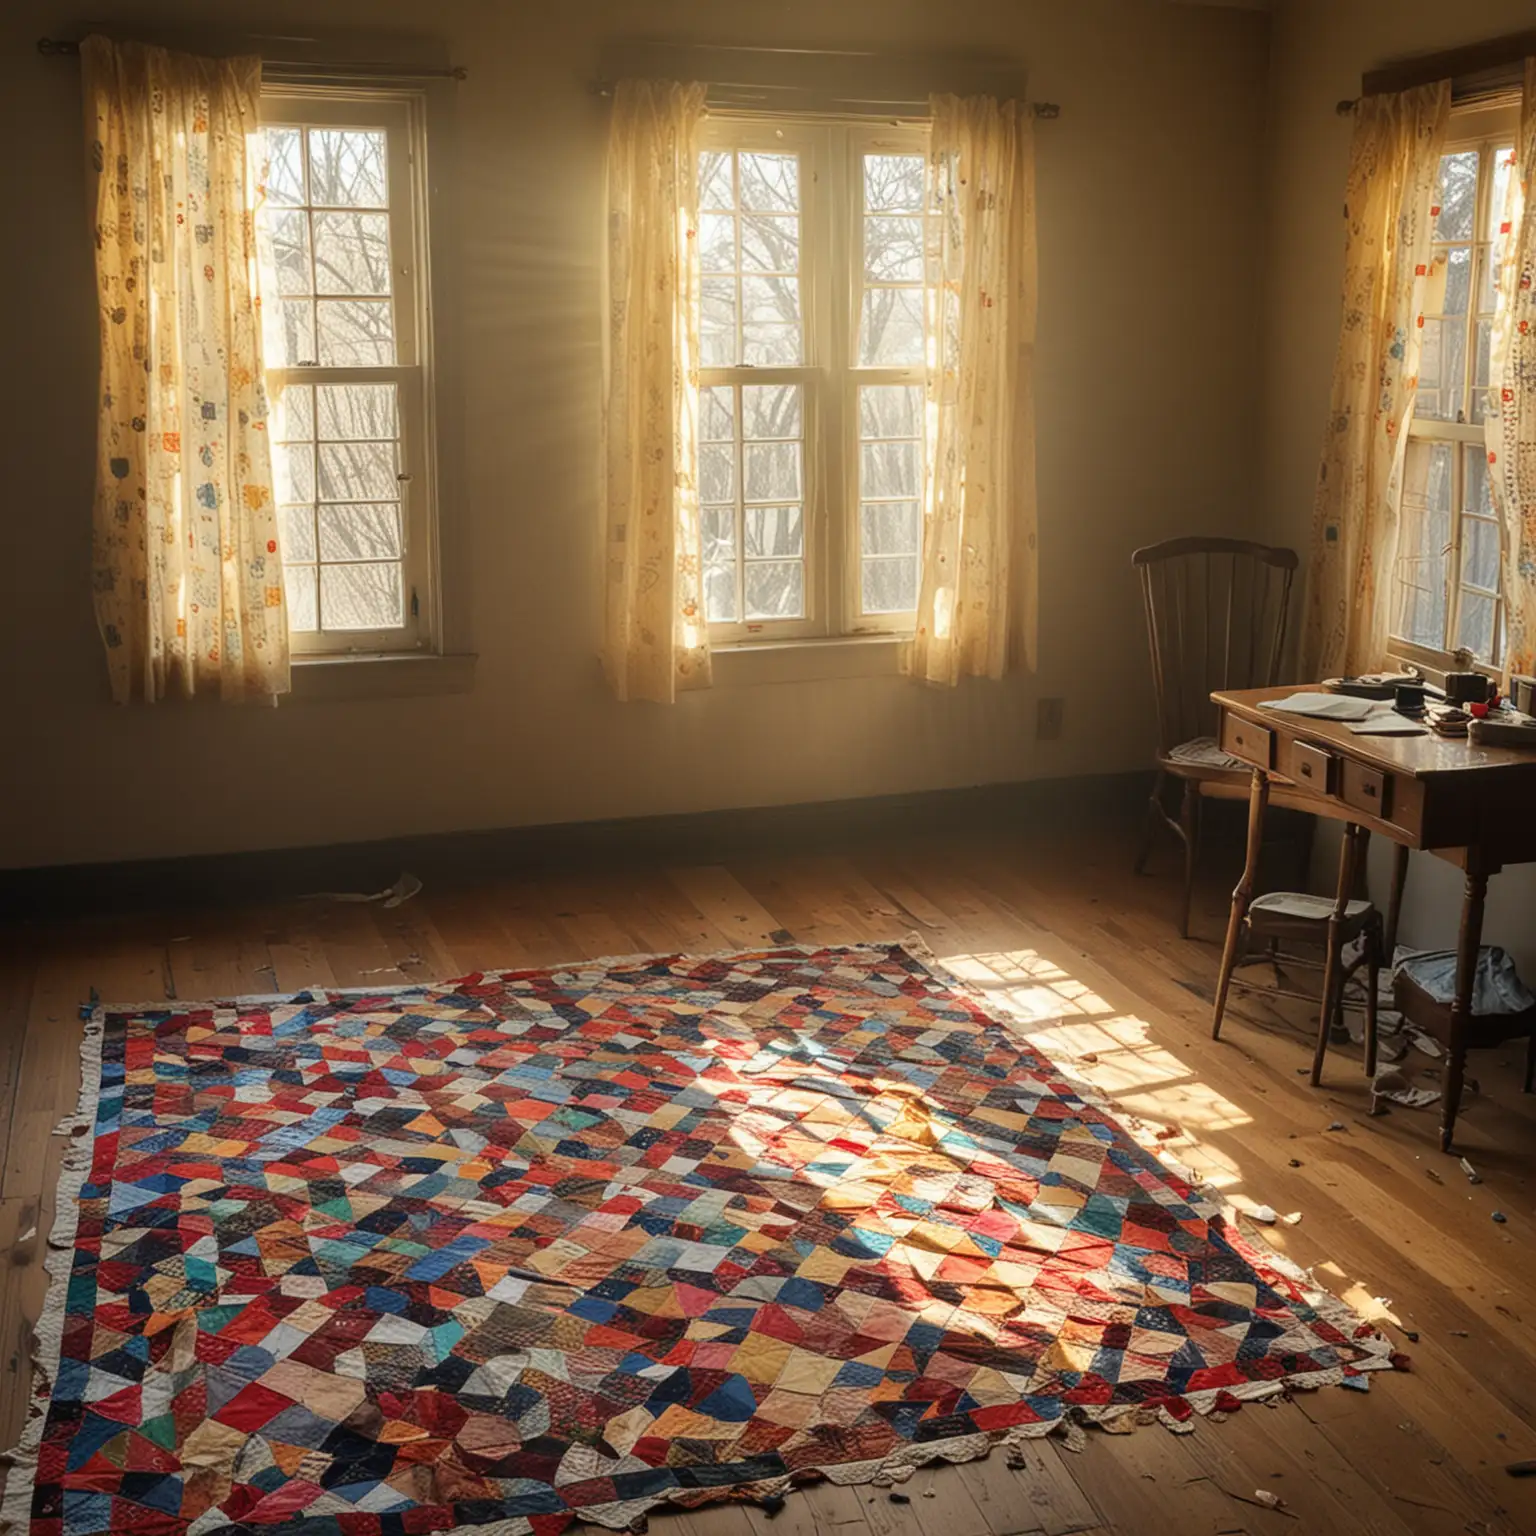 A oldr room with hardwood floors with a dulled and torn patchwork quilt drapped across a wooden teachers desk.  illuminated by the bright sun entering from large windows. --ar 2:3 --sref https://s.mj.run/87Sjf94hFiI ::1.5 <https://s.mj.run/BdQFQve9VPQ>

